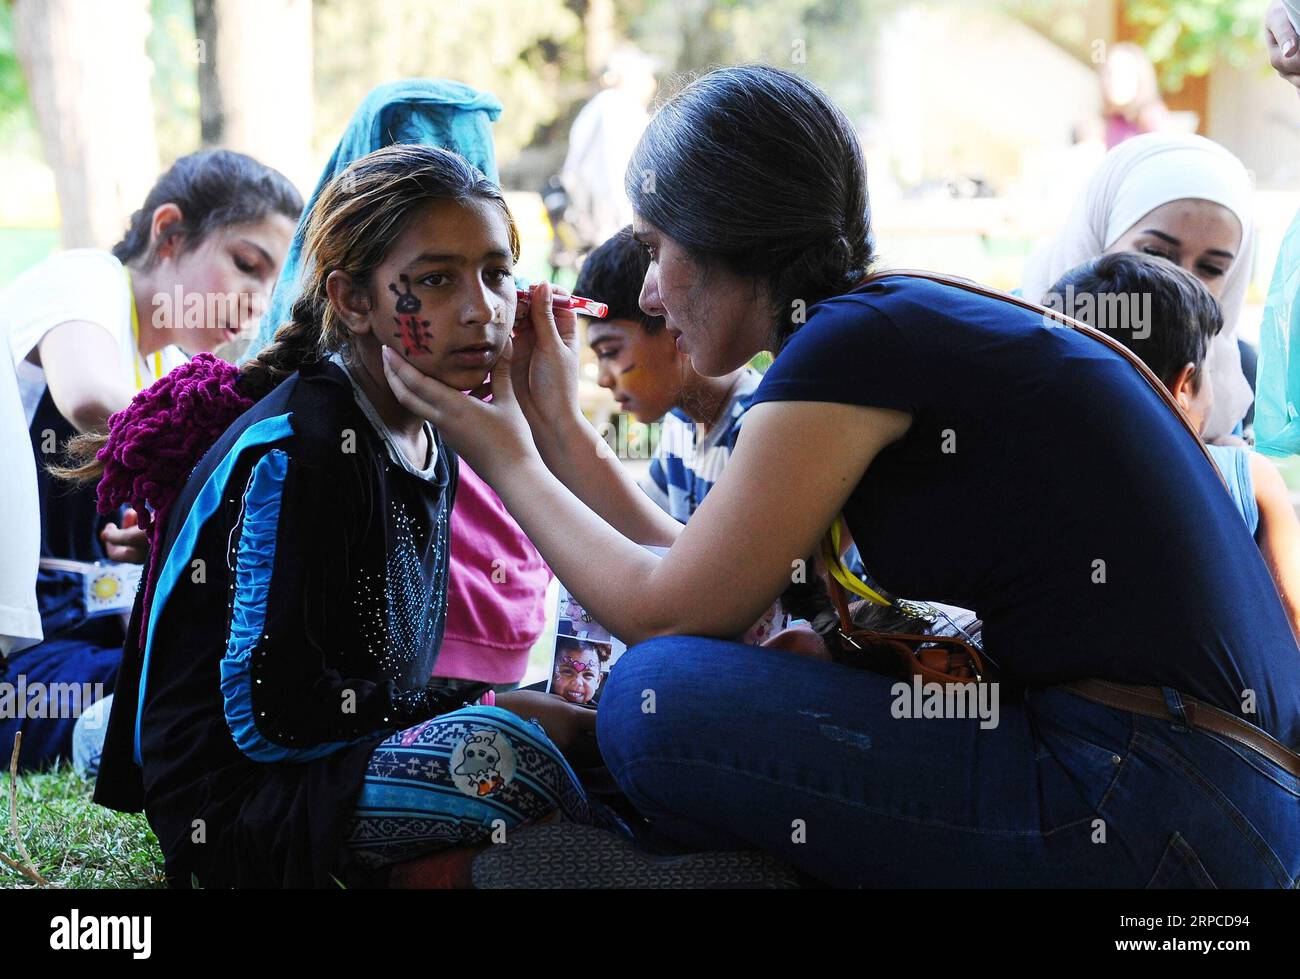 (190701) -- DAMASCUS, July 1, 2019 -- Homeless Syrian kids participate in activities organized by the Sayyar Initiative in Damascus, Syria, on July 1, 2019. The activities were held to make homeless Syrian kids feel loved and accepted in the society. ) SYRIA-DAMASCUS-ACTIVITIES-HOMELESS KIDS AmmarxSafarjalani PUBLICATIONxNOTxINxCHN Stock Photo